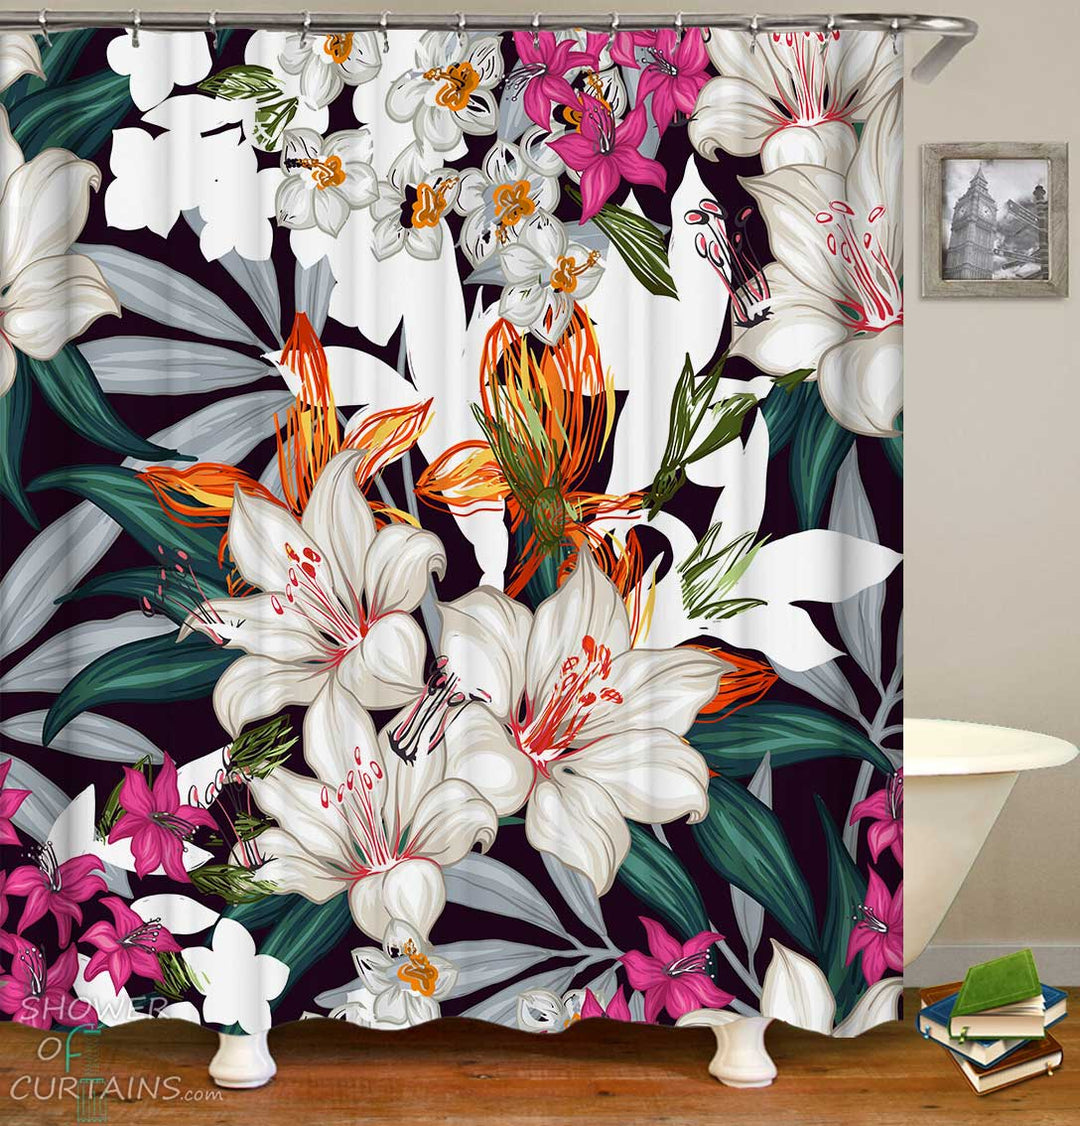 Shower Curtains with Eye Catching Tropical Flowers